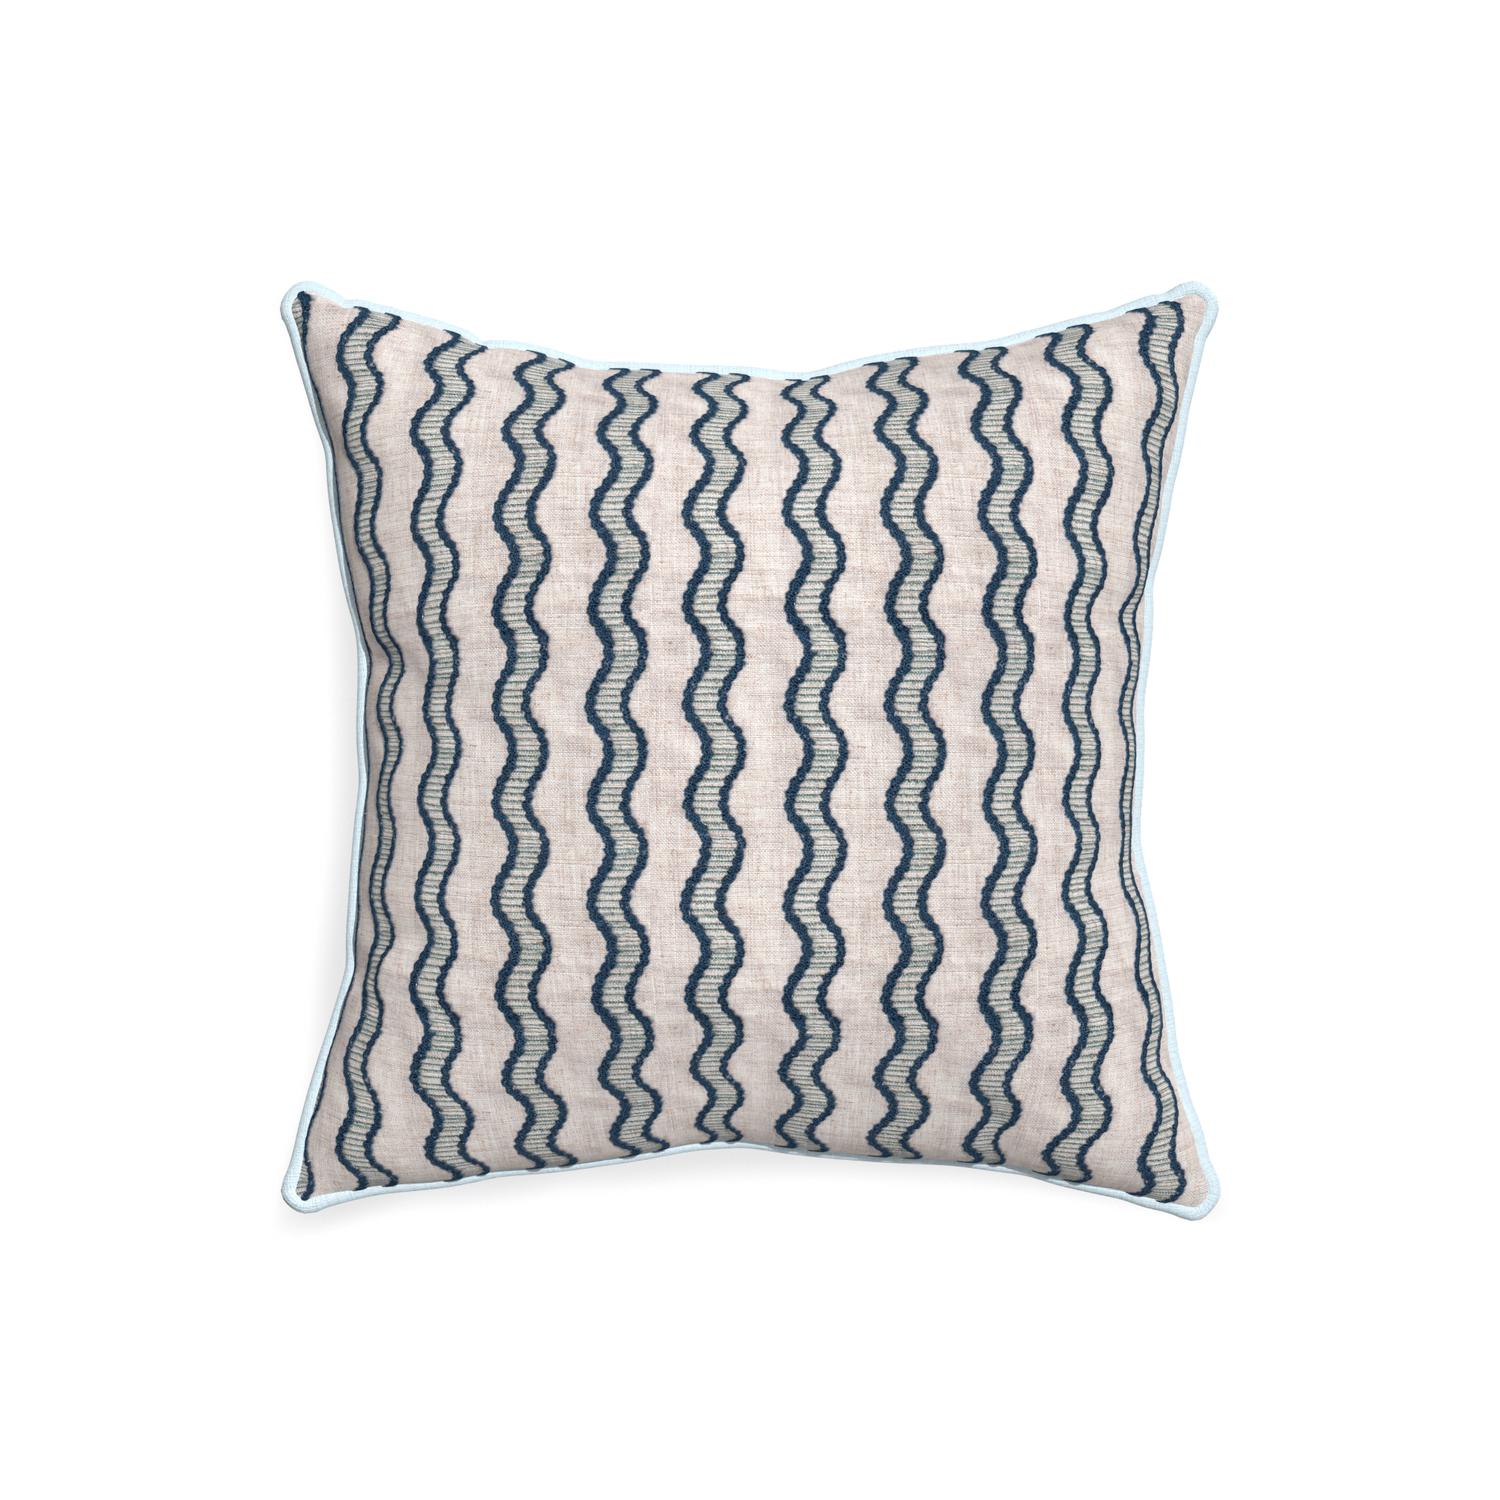 20-square beatrice custom embroidered wavepillow with powder piping on white background